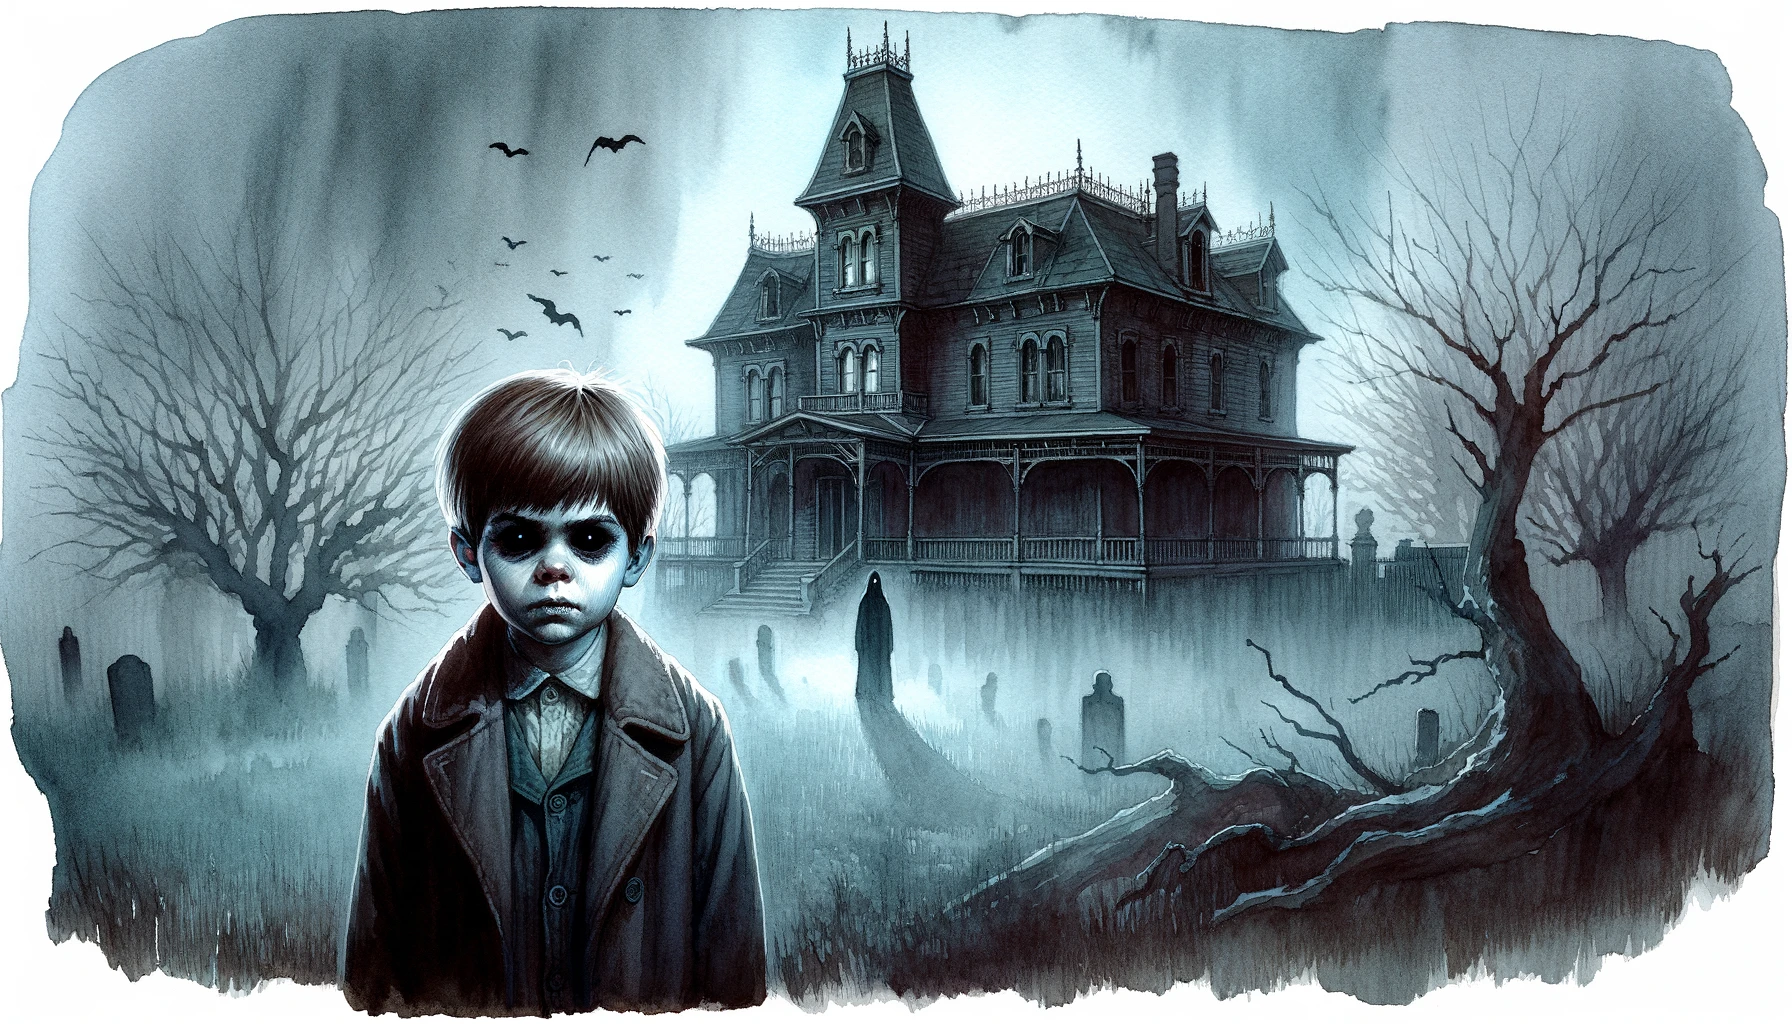 Cover image for the blog post on movies like Insidious. It features a creepy little boy sanding in front of a creepy house.